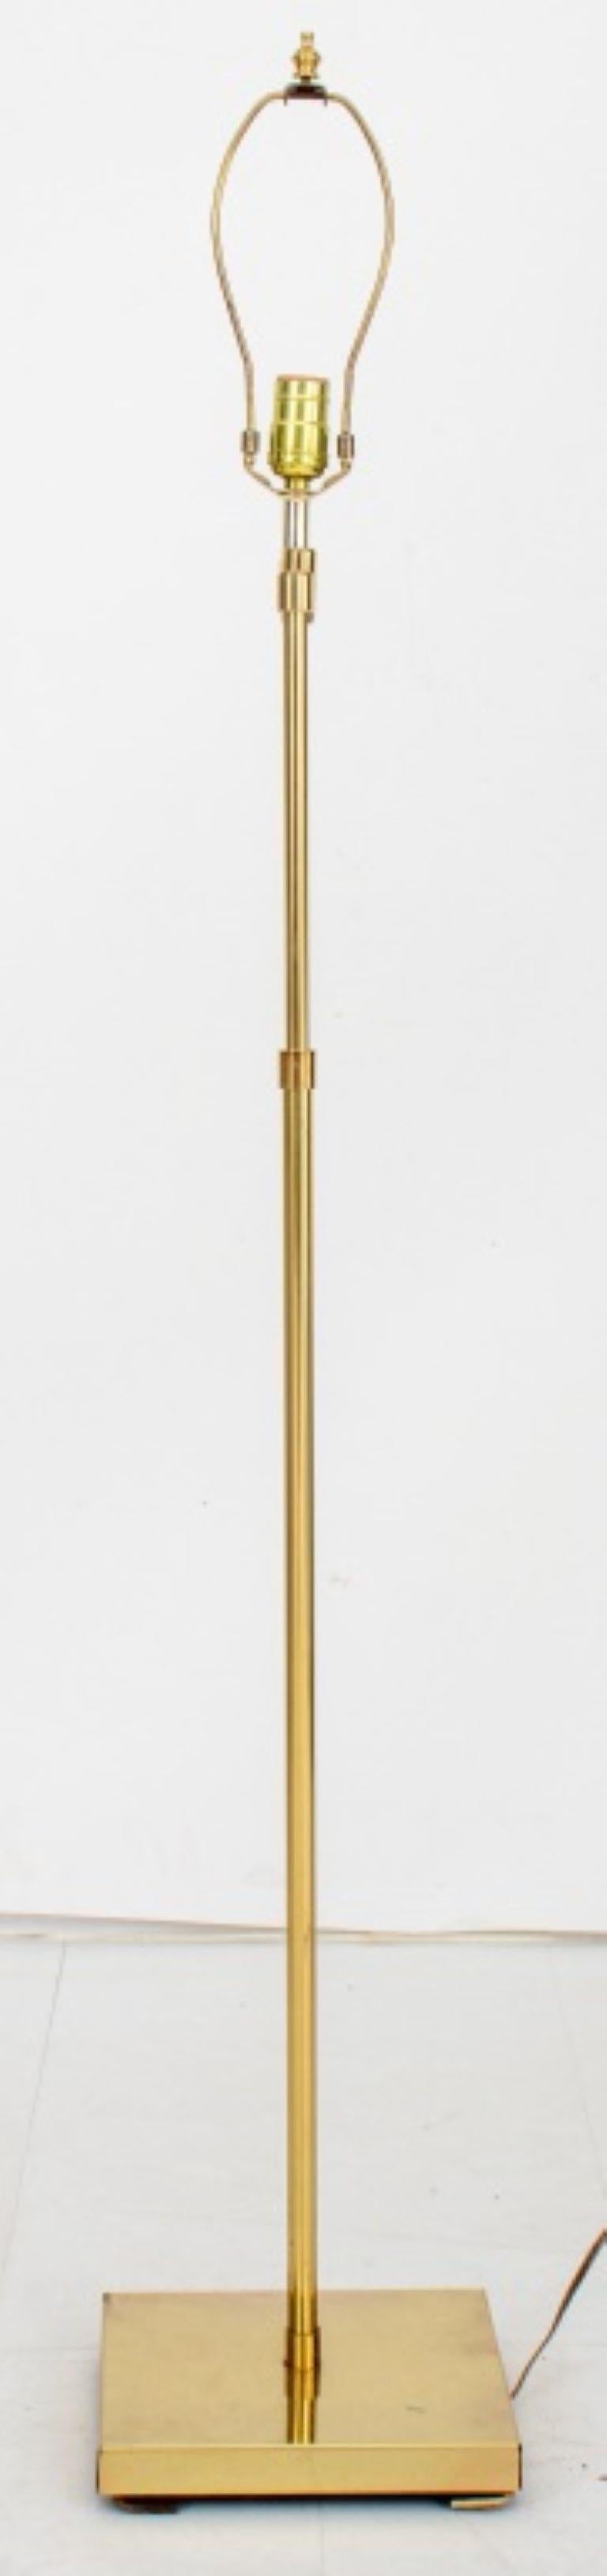 Unknown Brass Swing-Arm Floor Lamp For Sale